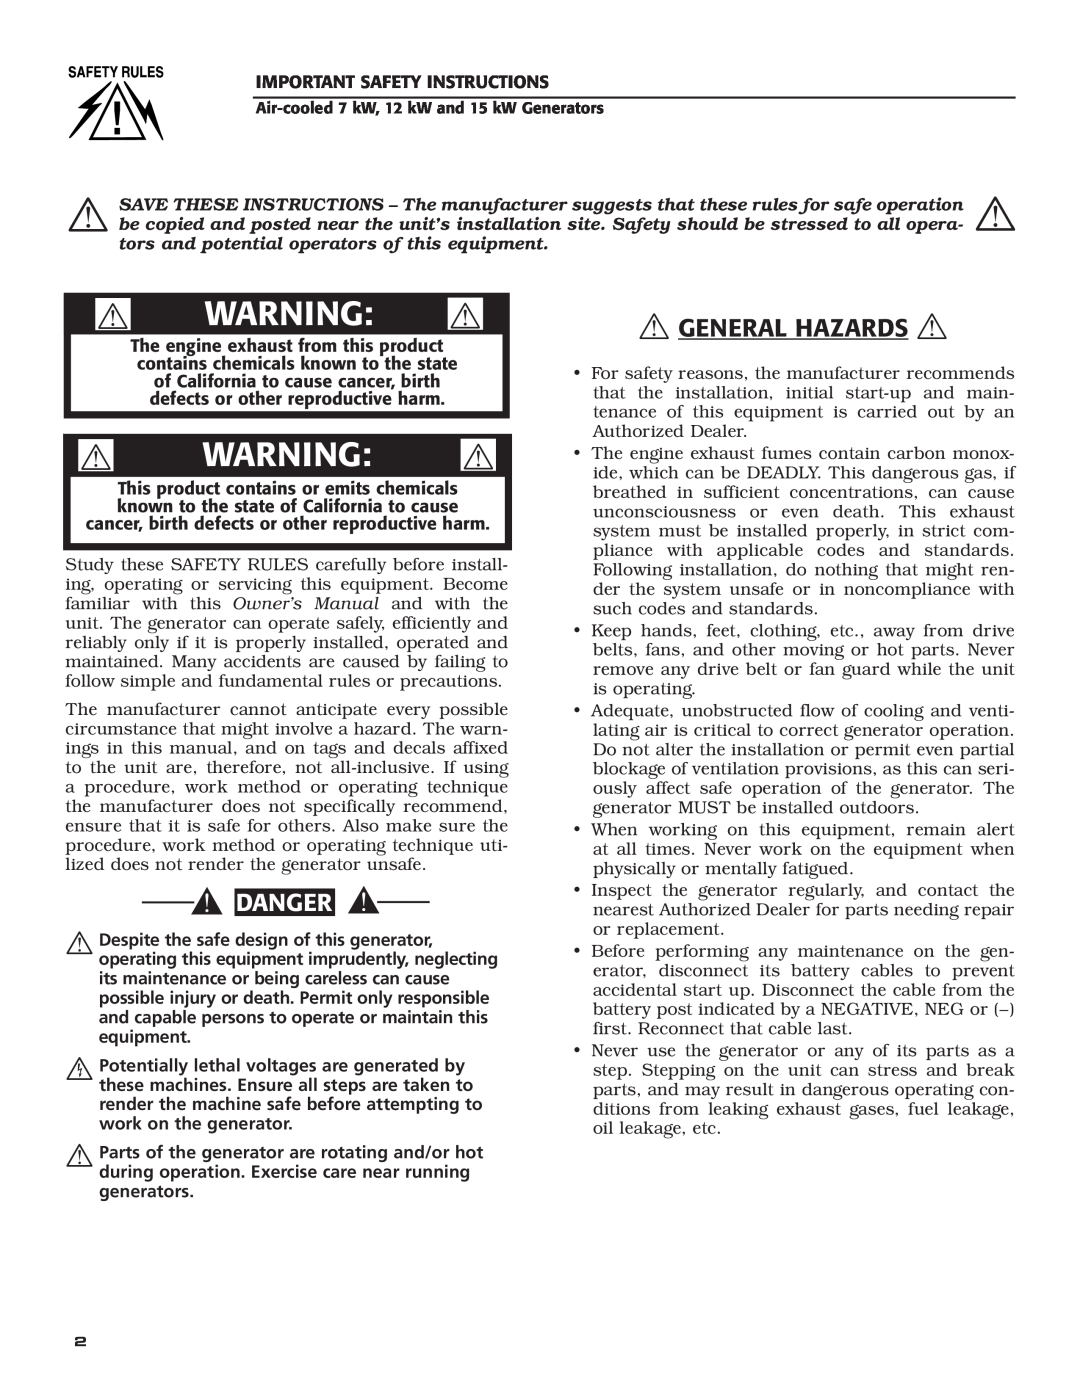 Generac Power Systems 04389-3, 04456-3, 04390-3  General Hazards ,  Warning , Danger, Important Safety Instructions 